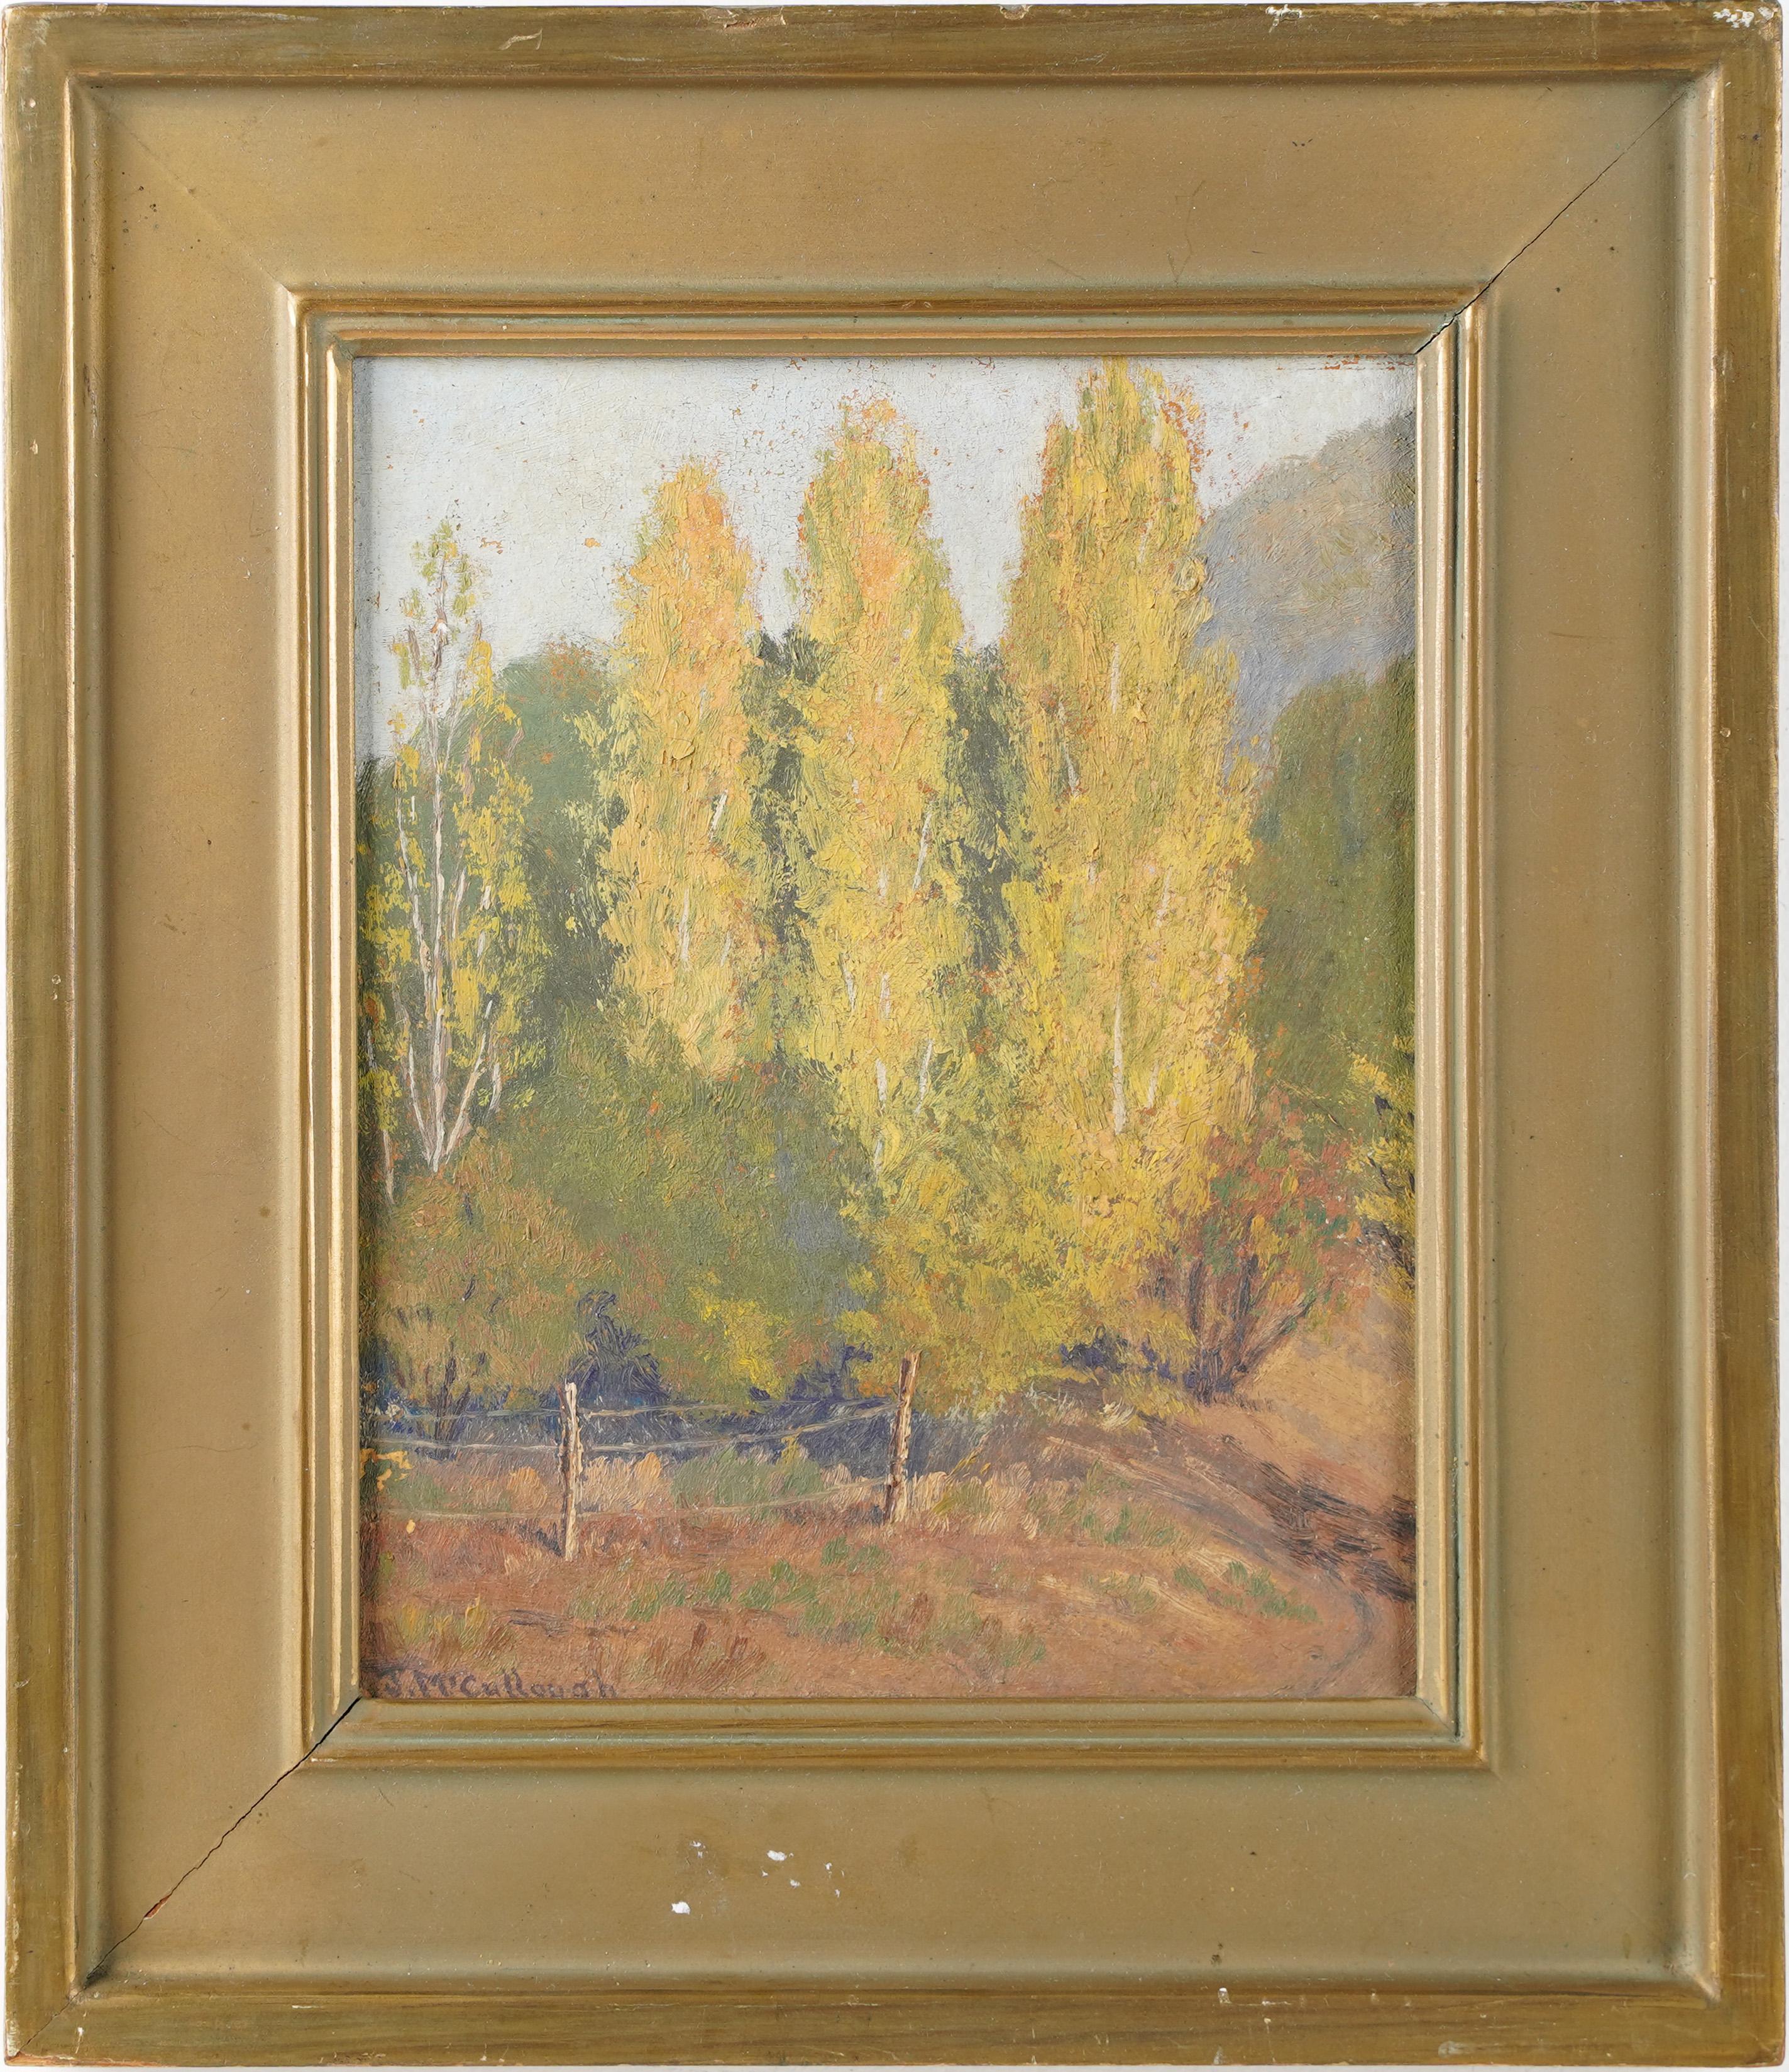 Jean McCullough Landscape Painting - Antique American Western Aspen Trees California Landscape Signed Oil Painting